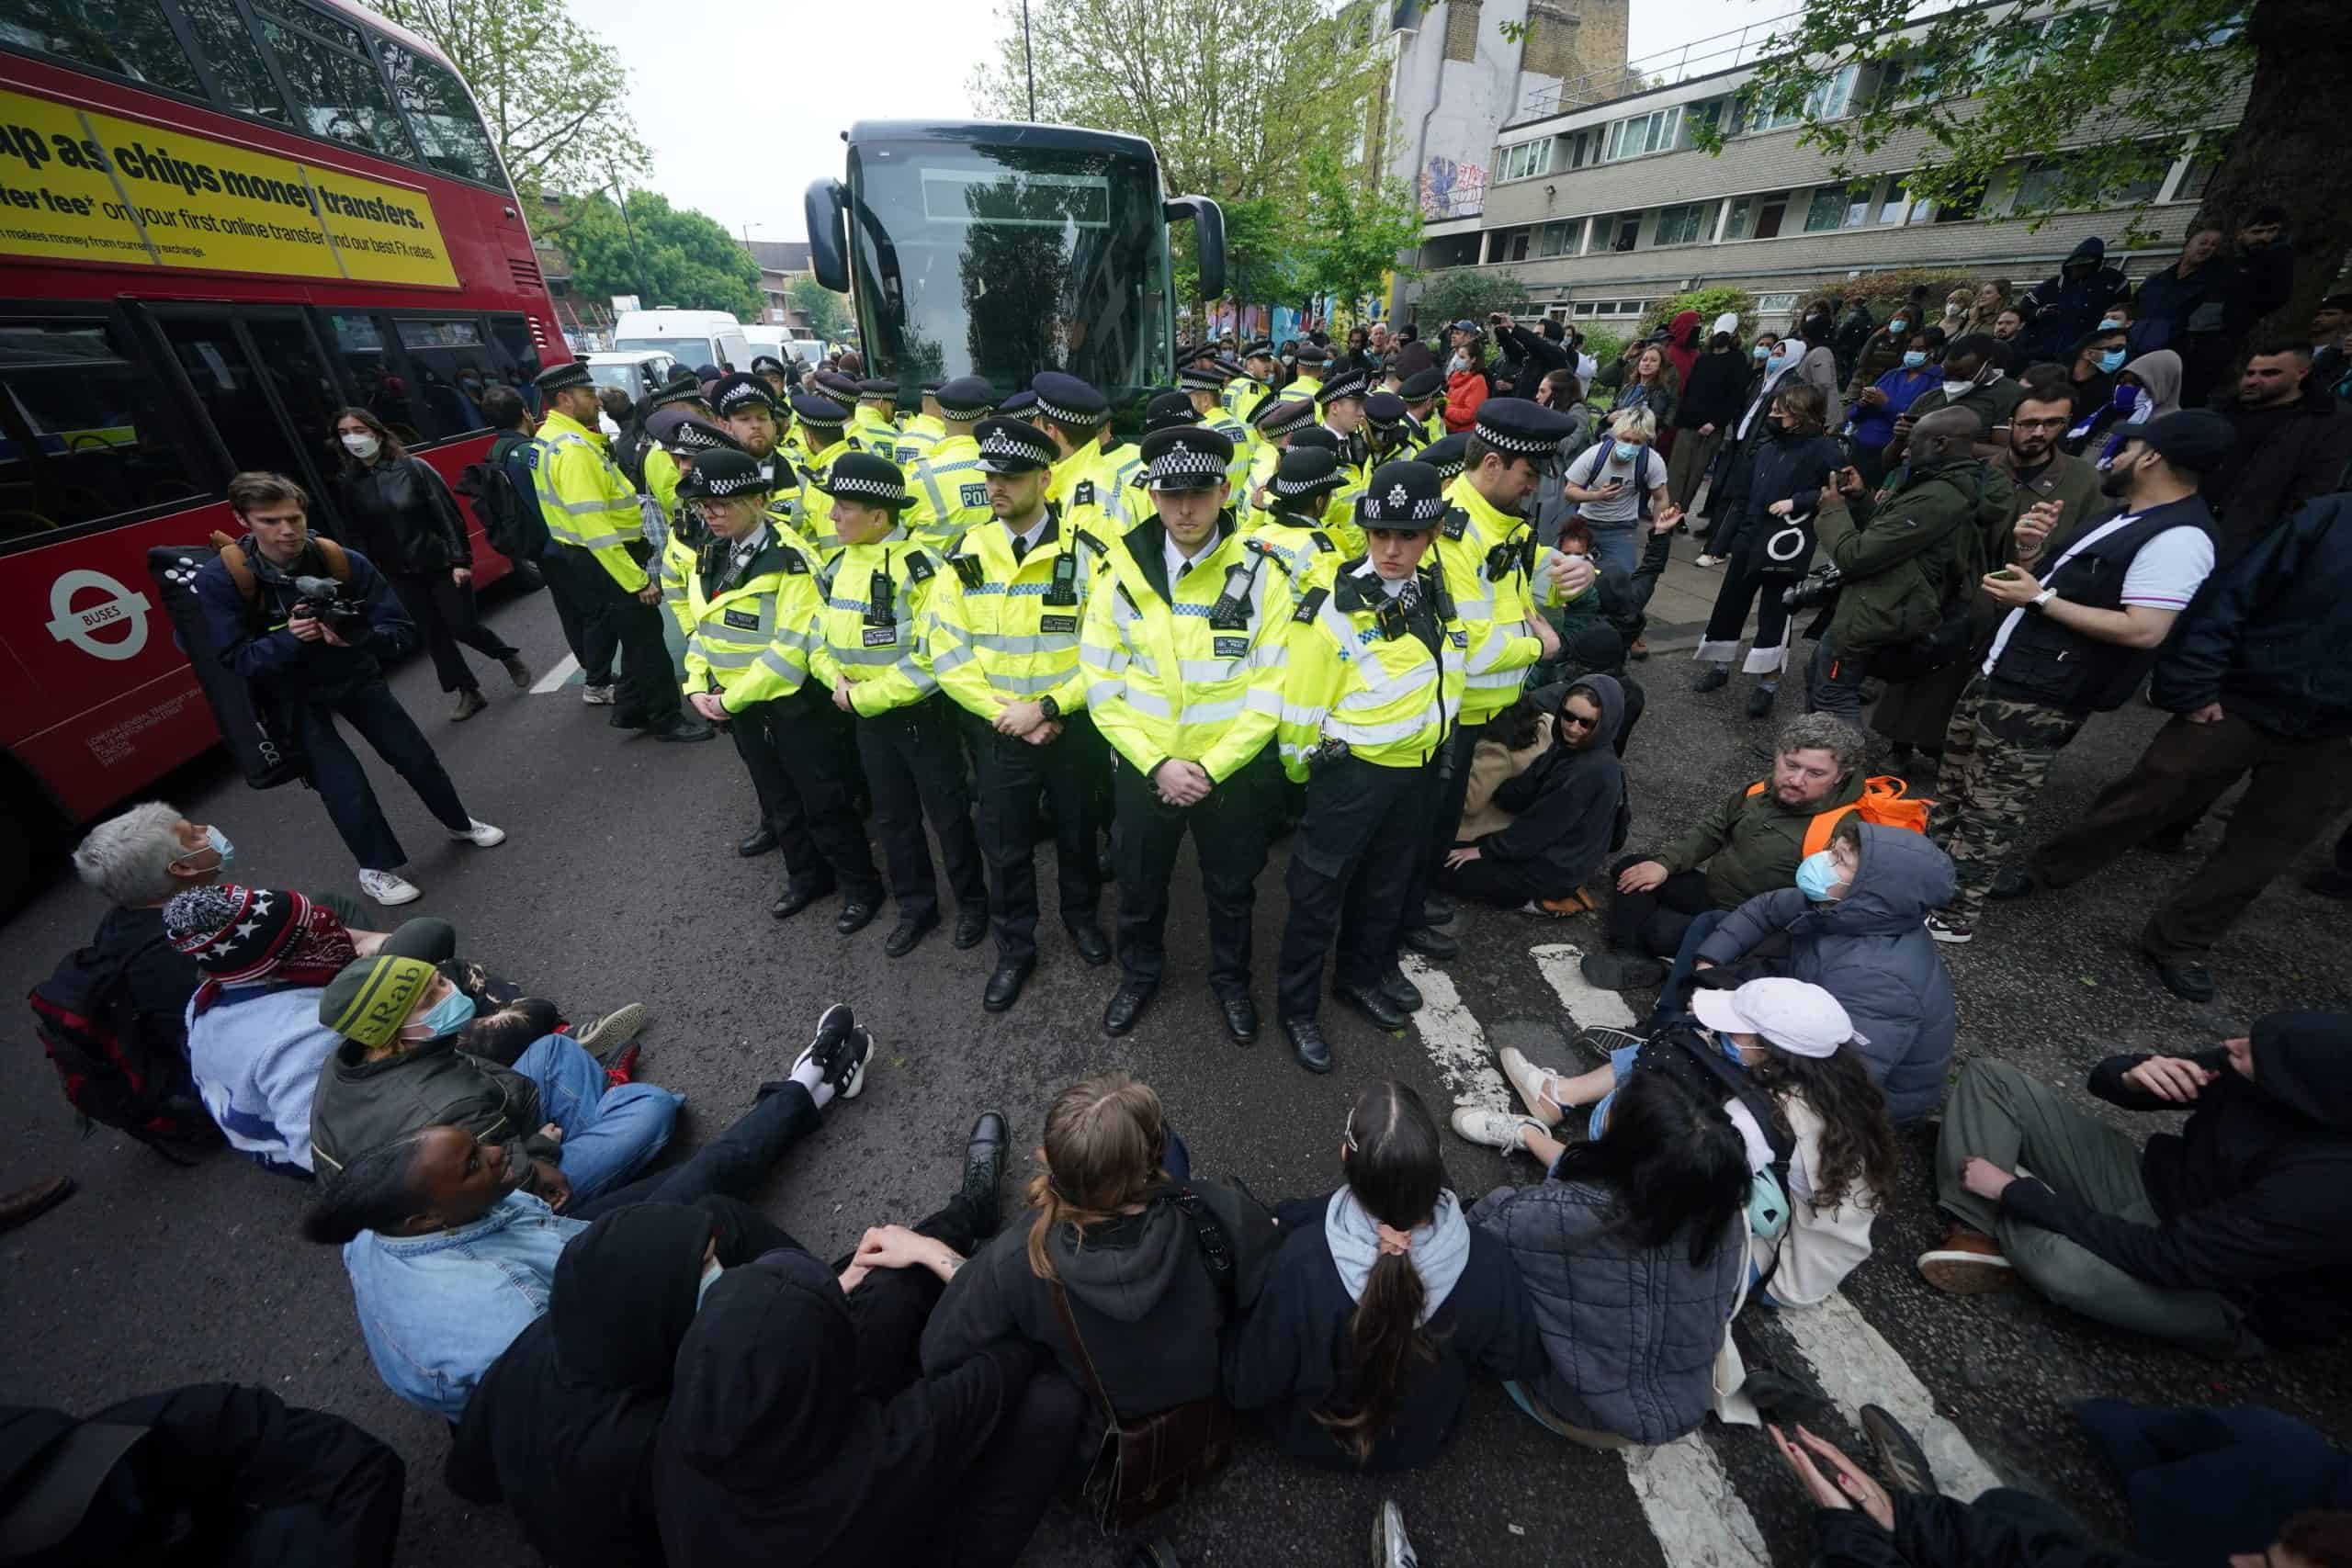 Protesters slash coach tyres to prevent migrants from being removed from London hotel